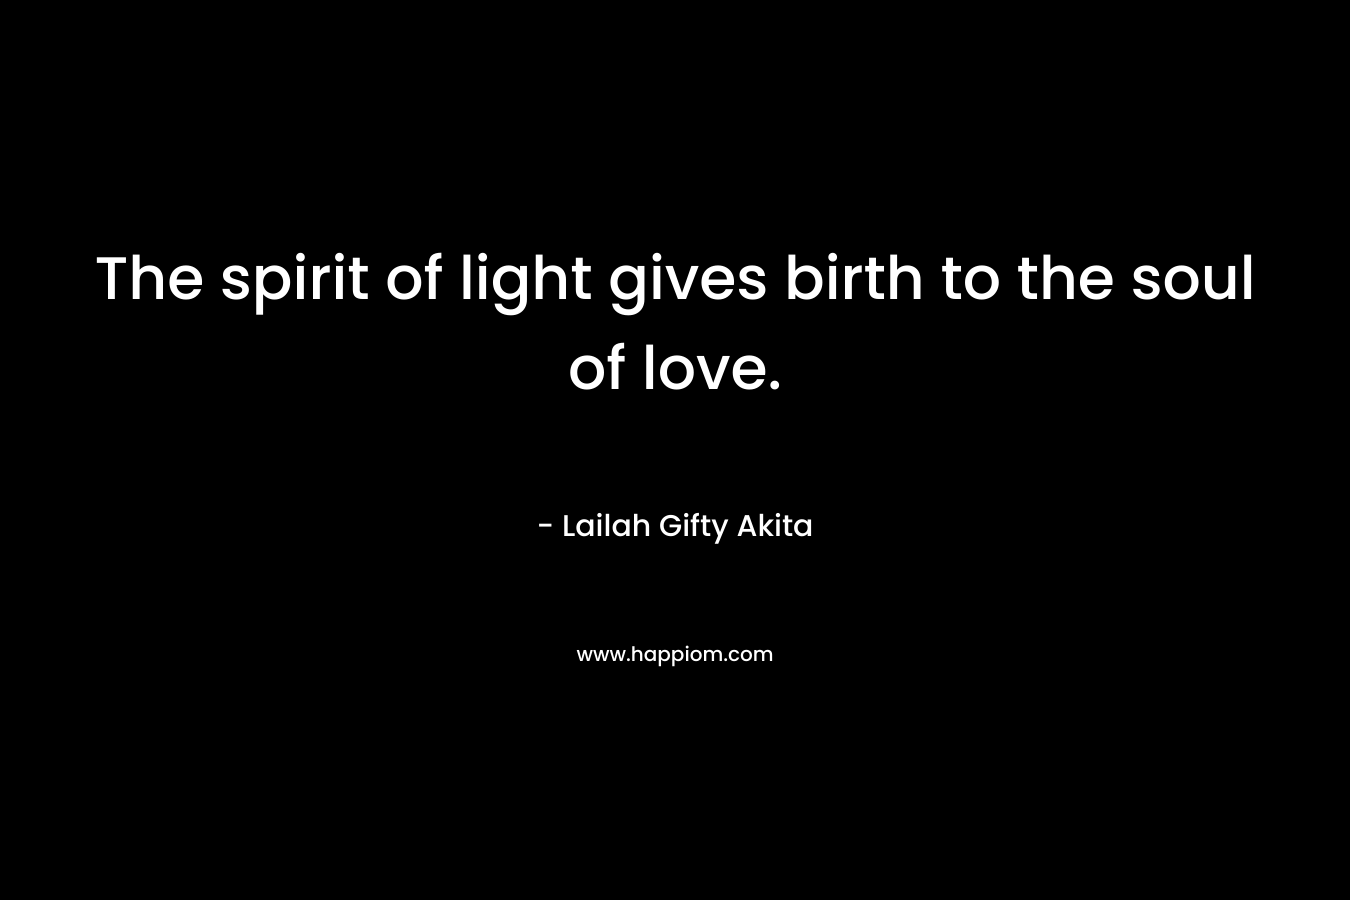 The spirit of light gives birth to the soul of love.